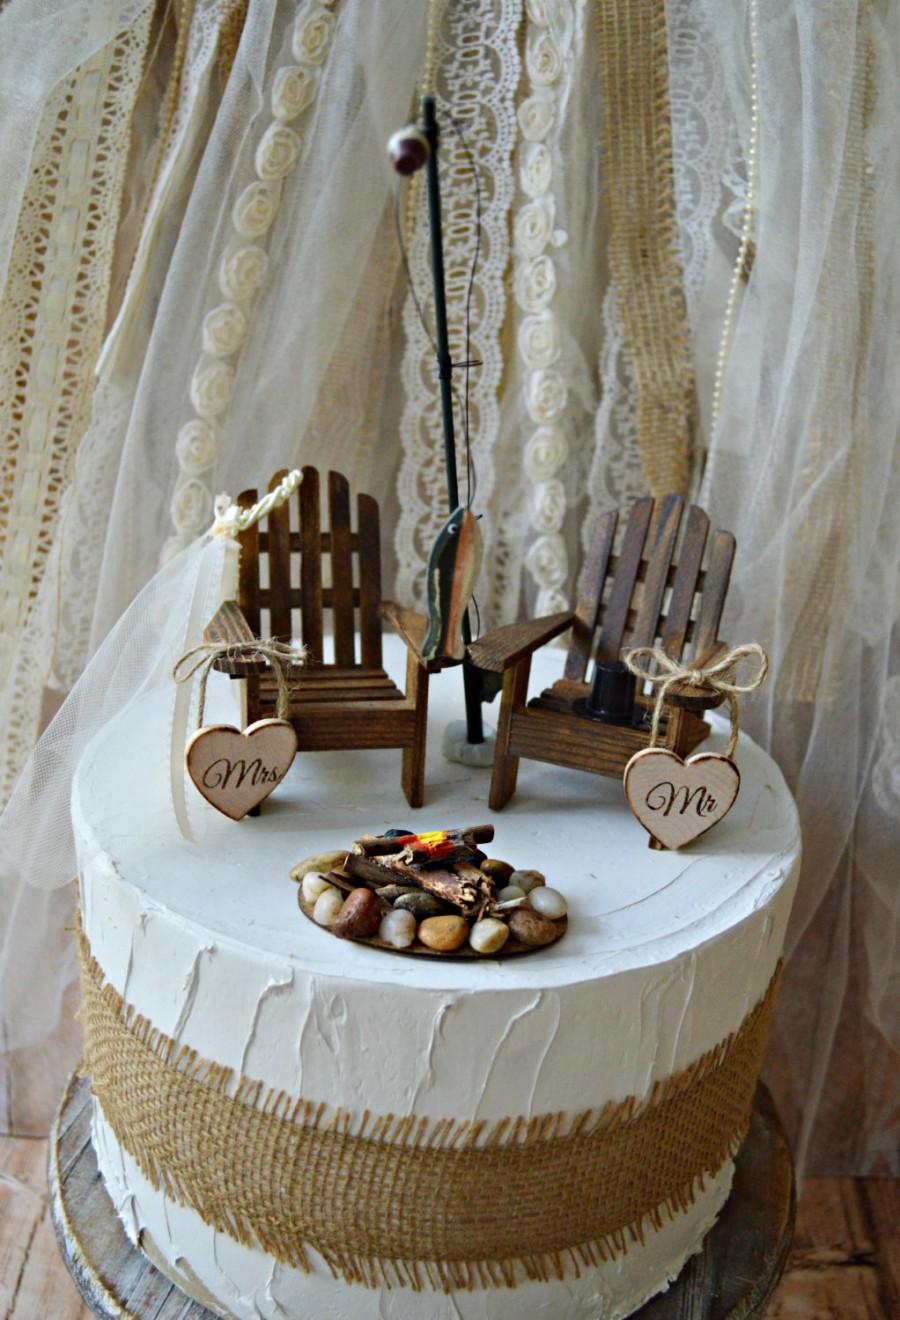 Mariage - hunting-camping-fishing-outdoors-wedding-cake topper-fishing groom-lake house-themed-wood chairs-bride and groom-camp fire-fishing pole